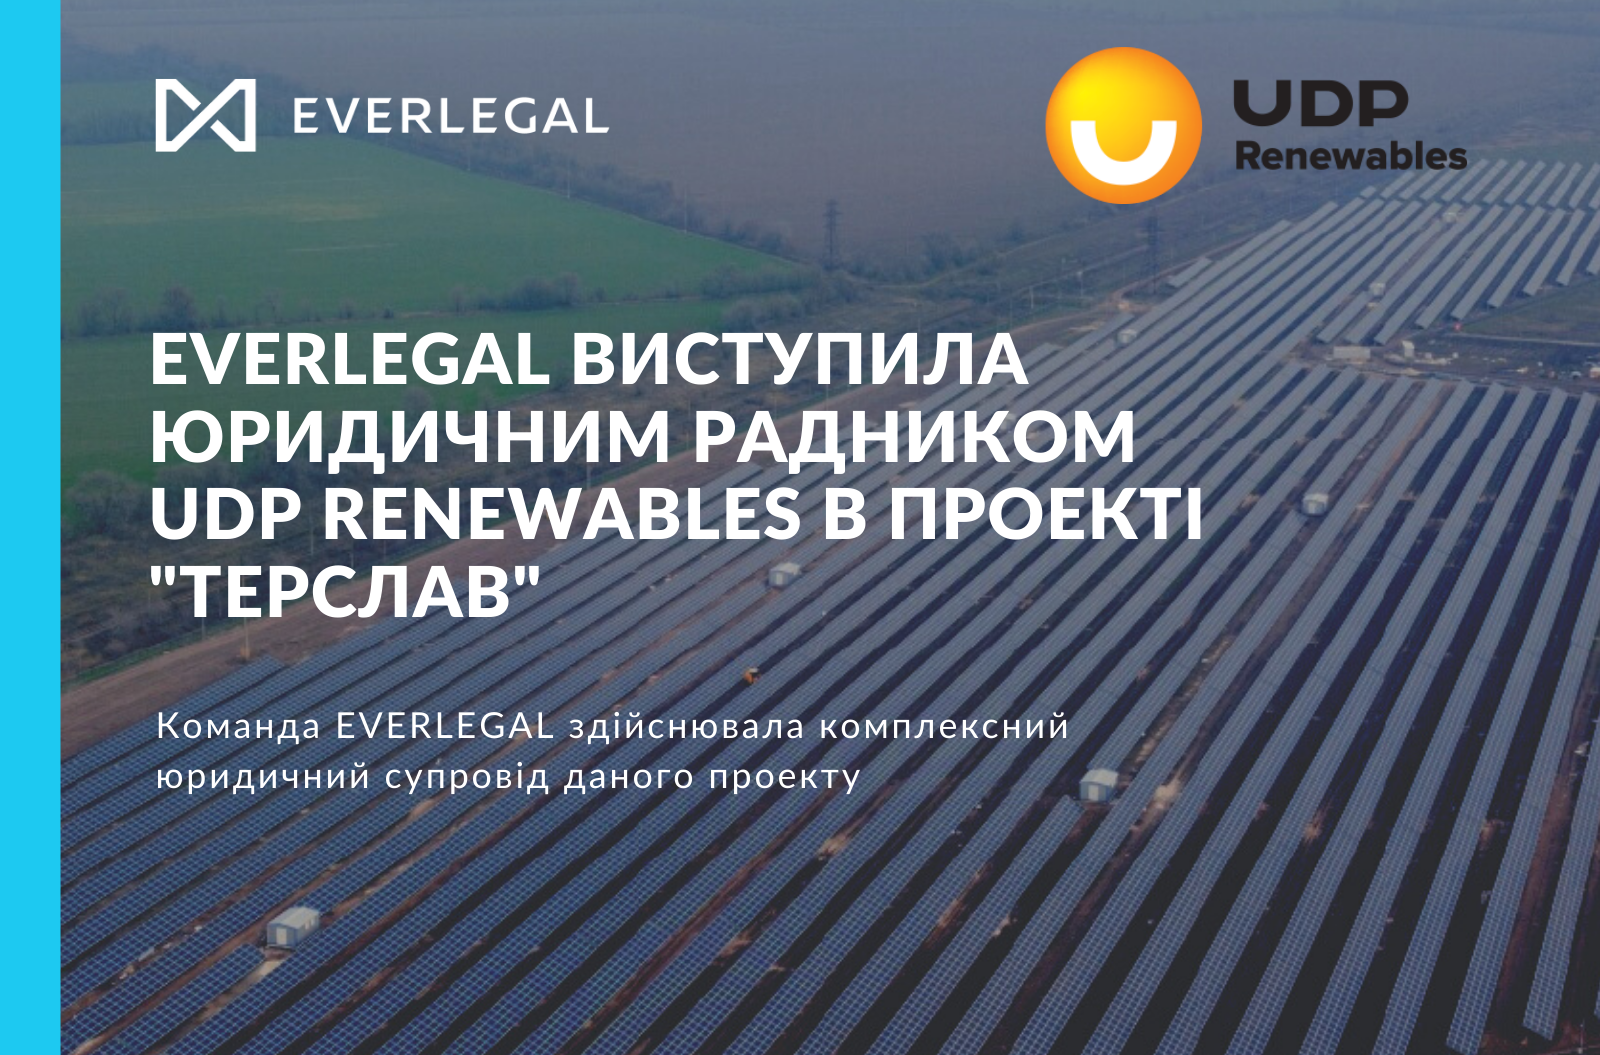 EVERLEGAL acted as legal counsel to UDP Renewables in connection with the Terslav project